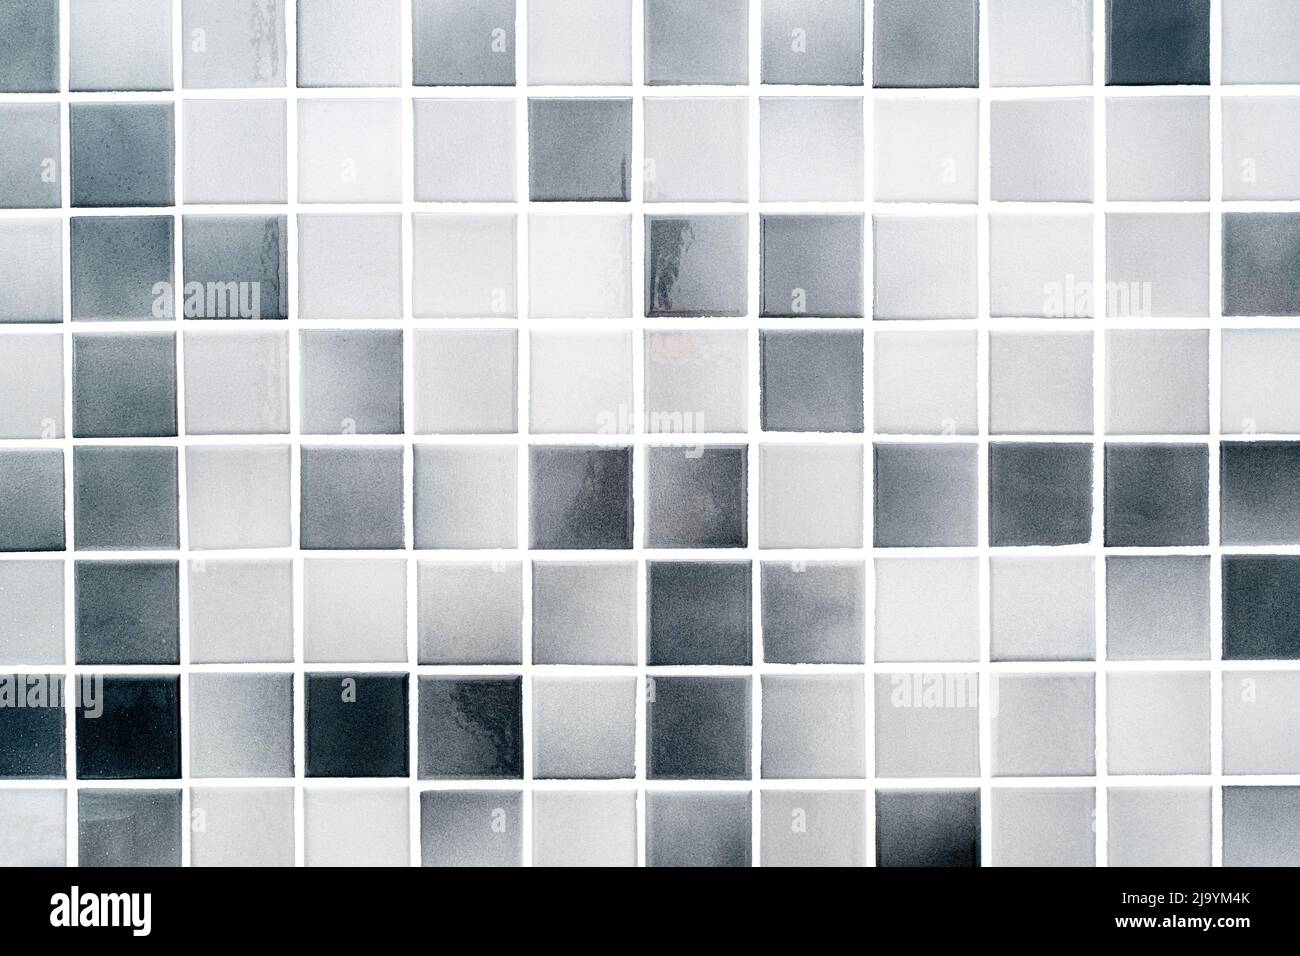 White and grey small ceramic tiles on a bathroom wall, modern clean tile as texture or background Stock Photo